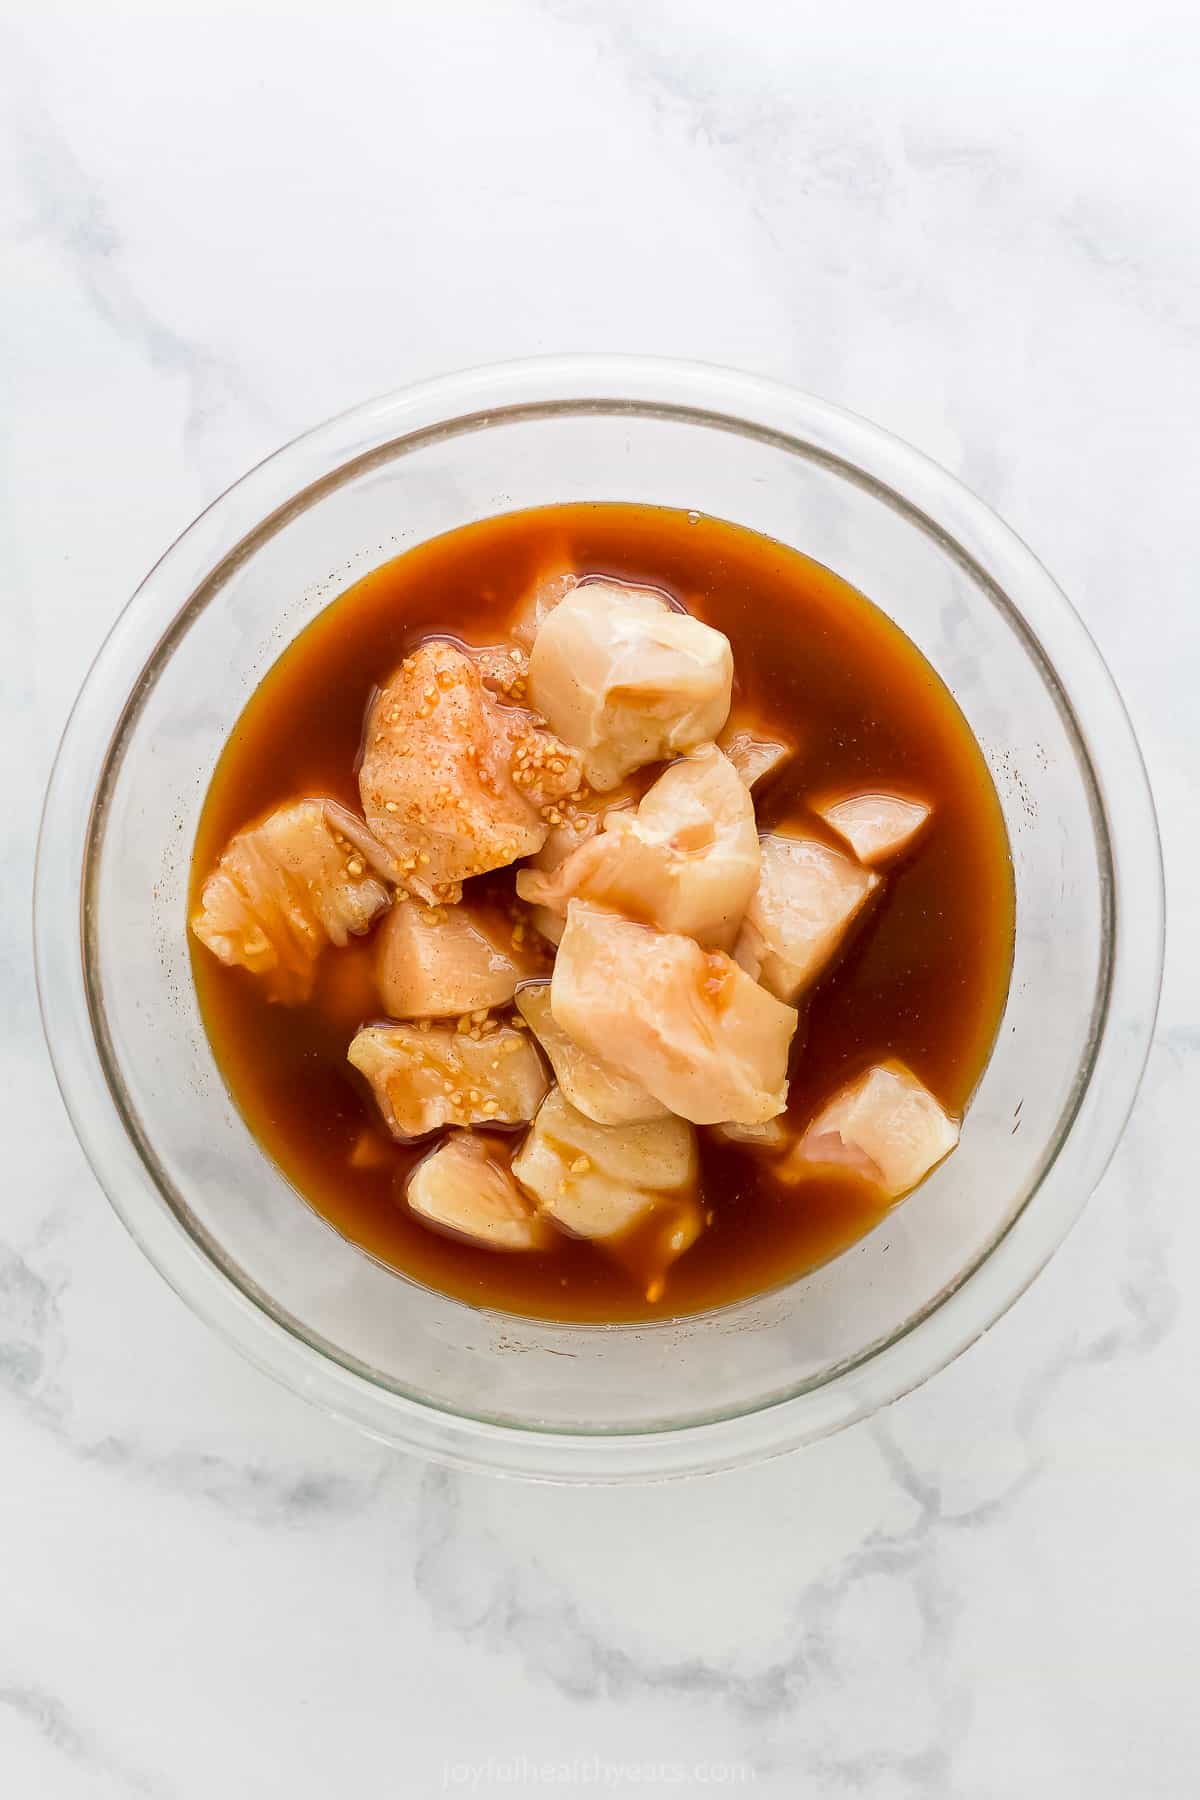 Cubes of boneless, skinless chicken in a glass bowl with homemade pineapple marinade